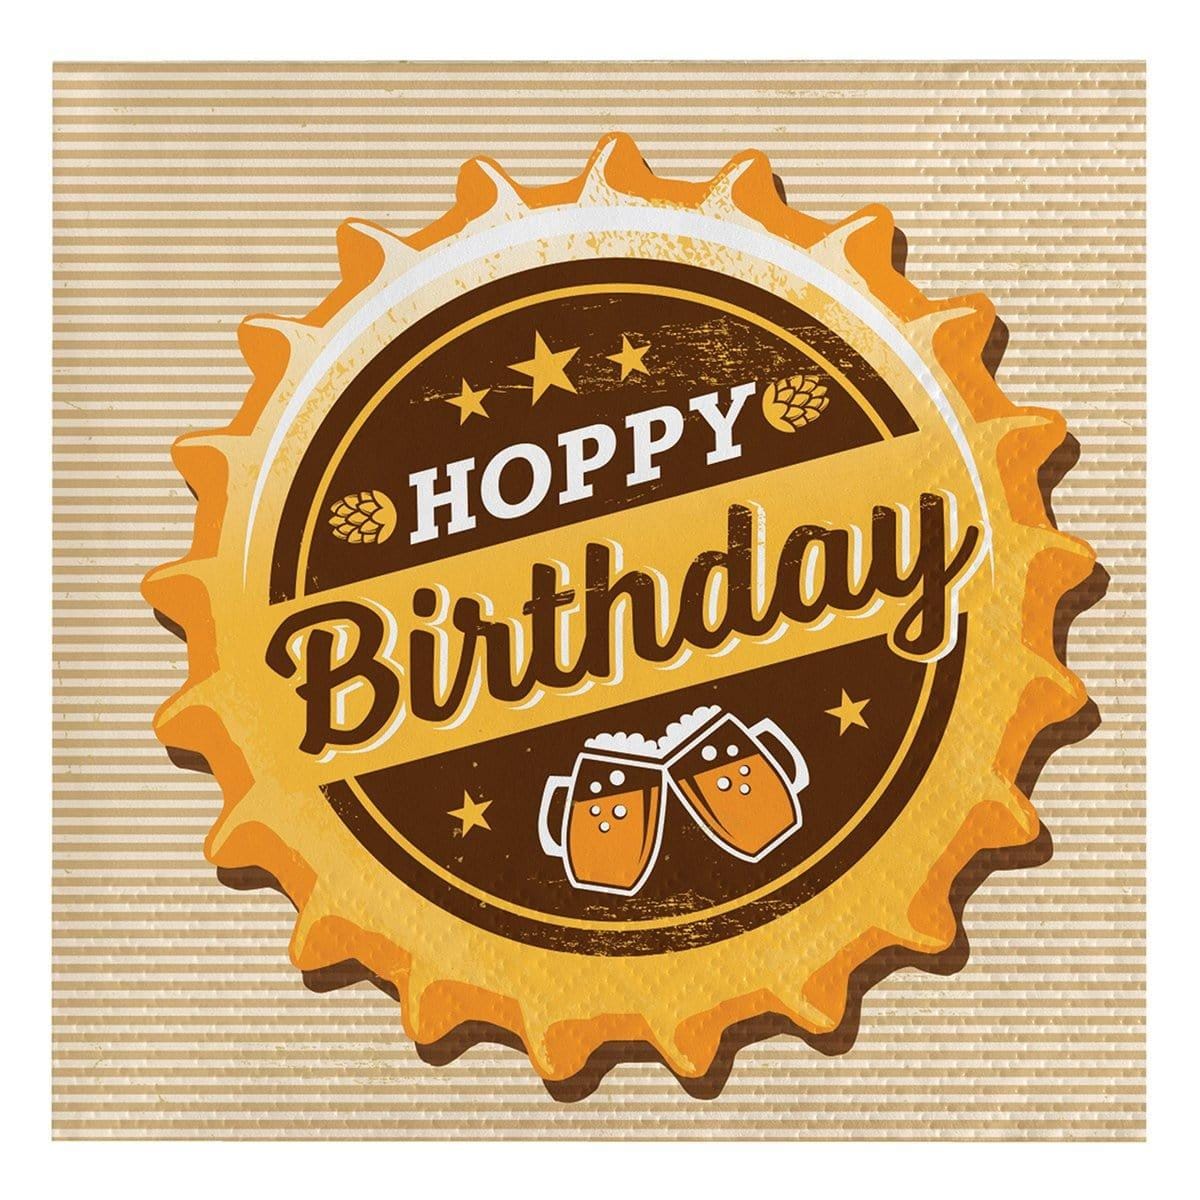 Buy Everyday Entertaining Cheers & Beers Hoopy Birthday Beverage Napkins, 16 per Package sold at Party Expert